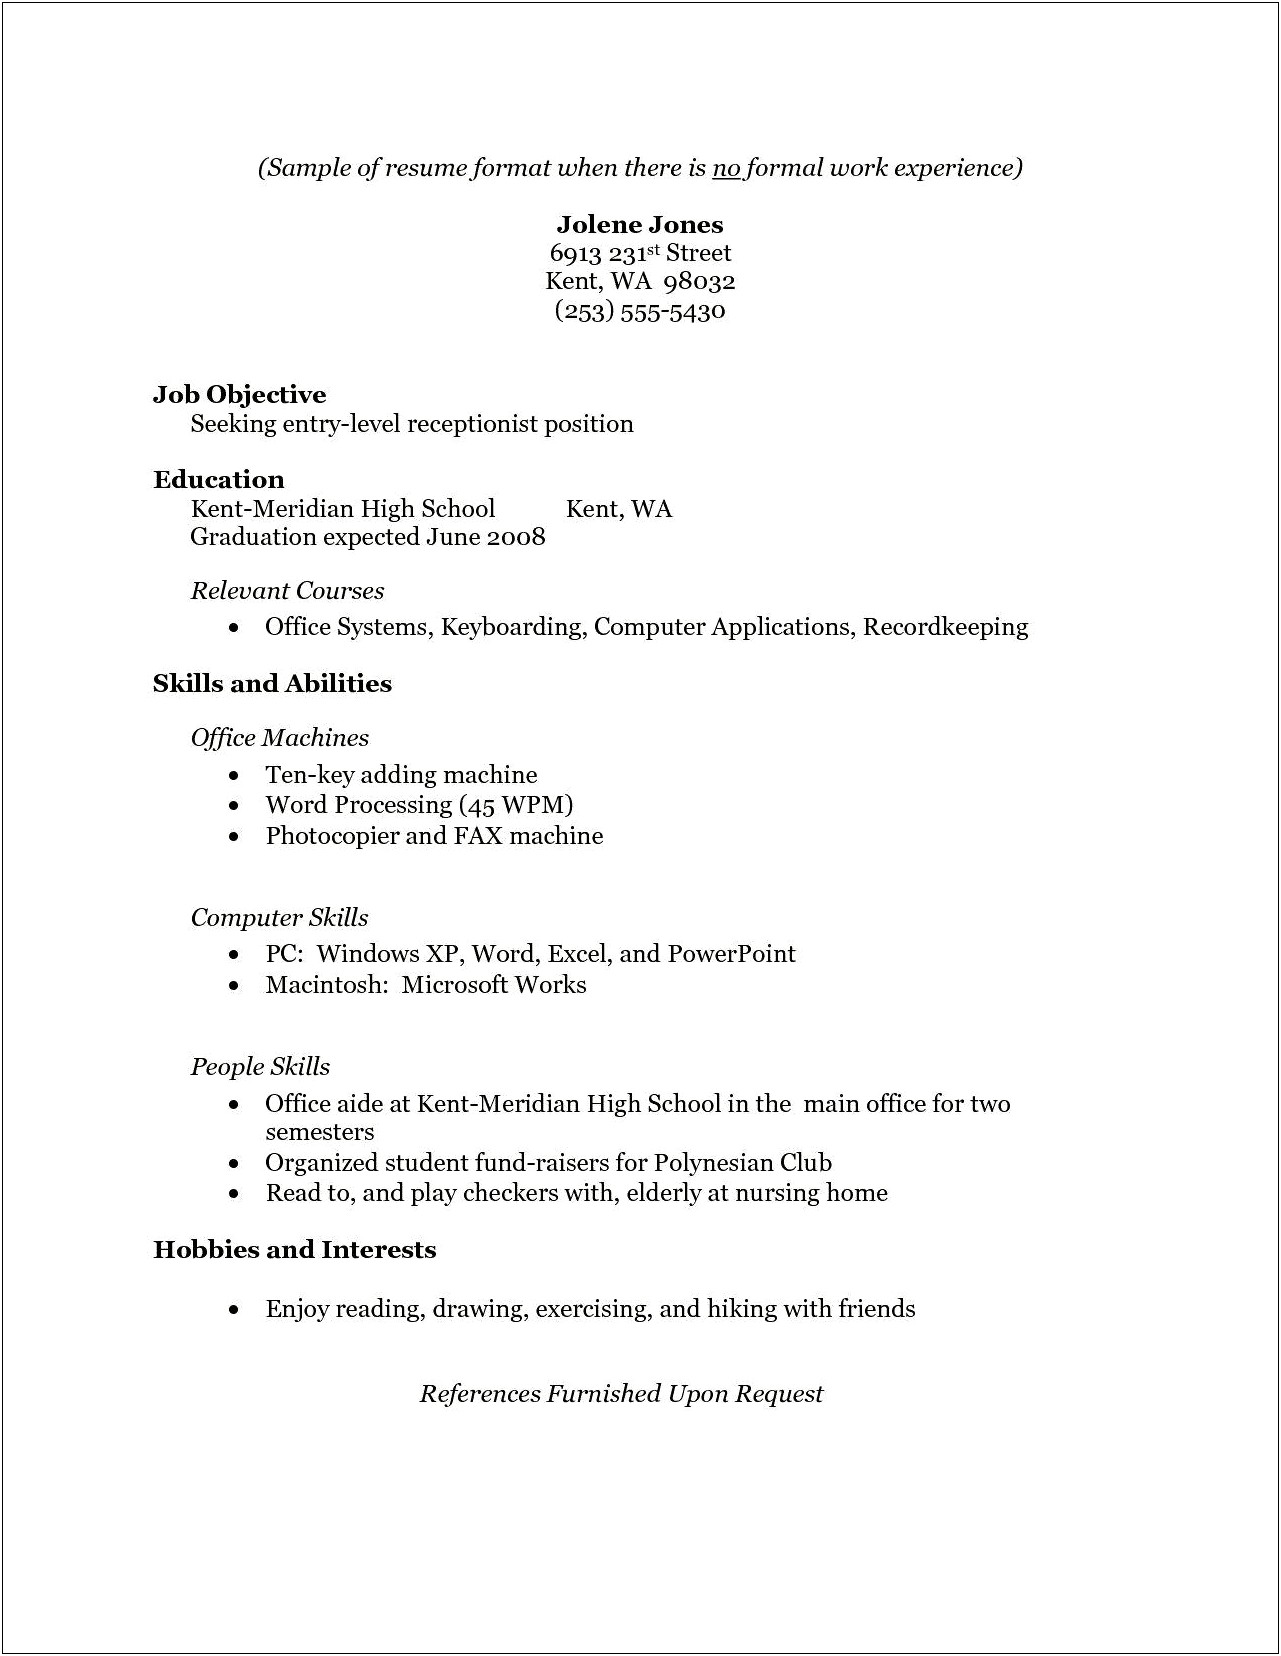 A Resume With No Experience Sample